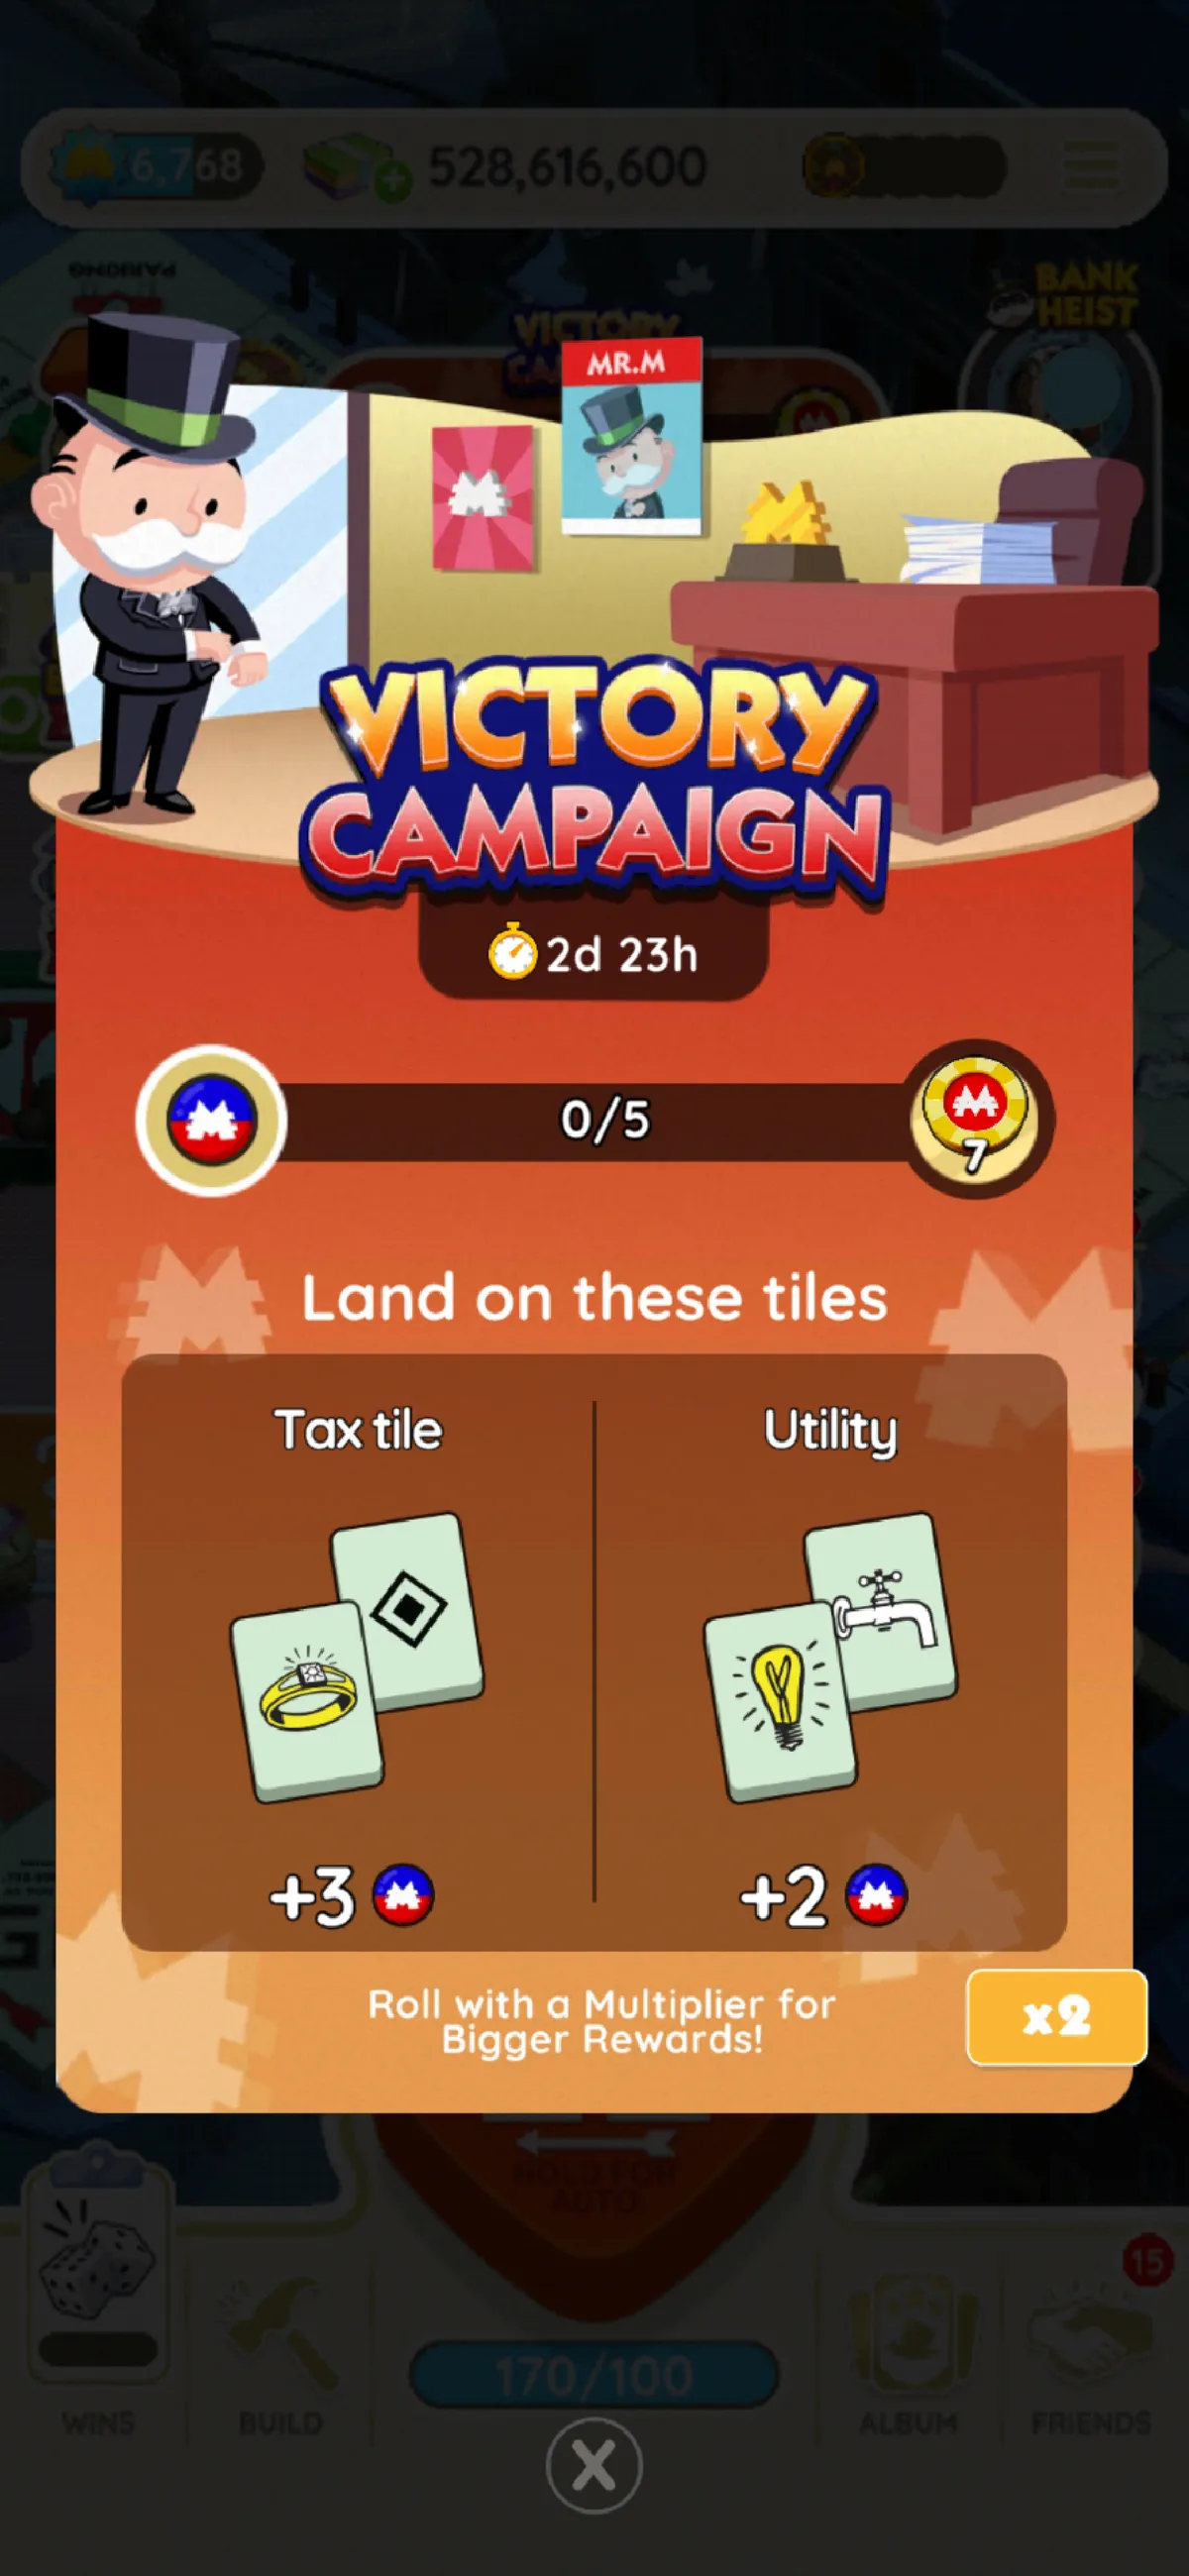 A full-sized image for the Victory Campaign event in Monopoly GO showing Mr. Monopoly in a campaign office. The image is part of an article on all the rewards and milestones for the Victory Campaign event in Monopoly GO.